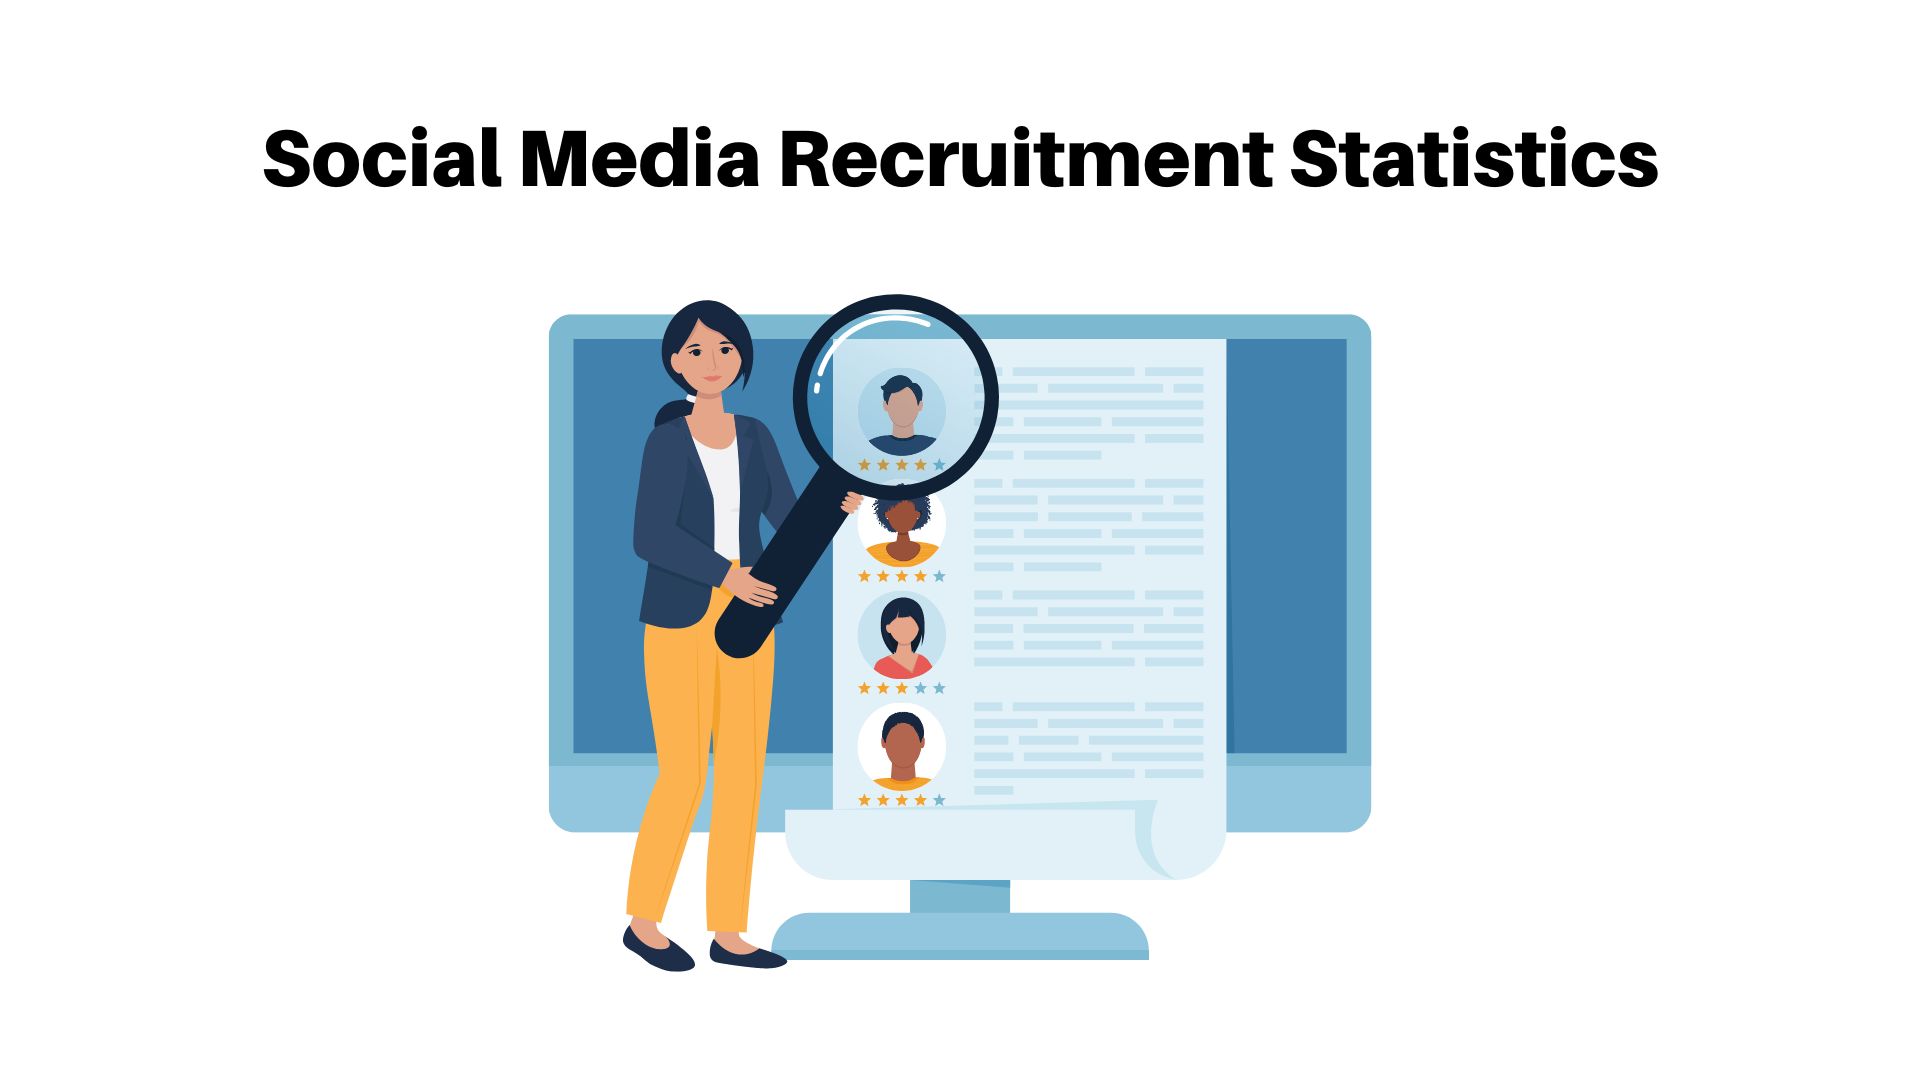 Social Media Recruitment Statistics – By Recruiters, Job seekers, Demographic, Platforms and Process